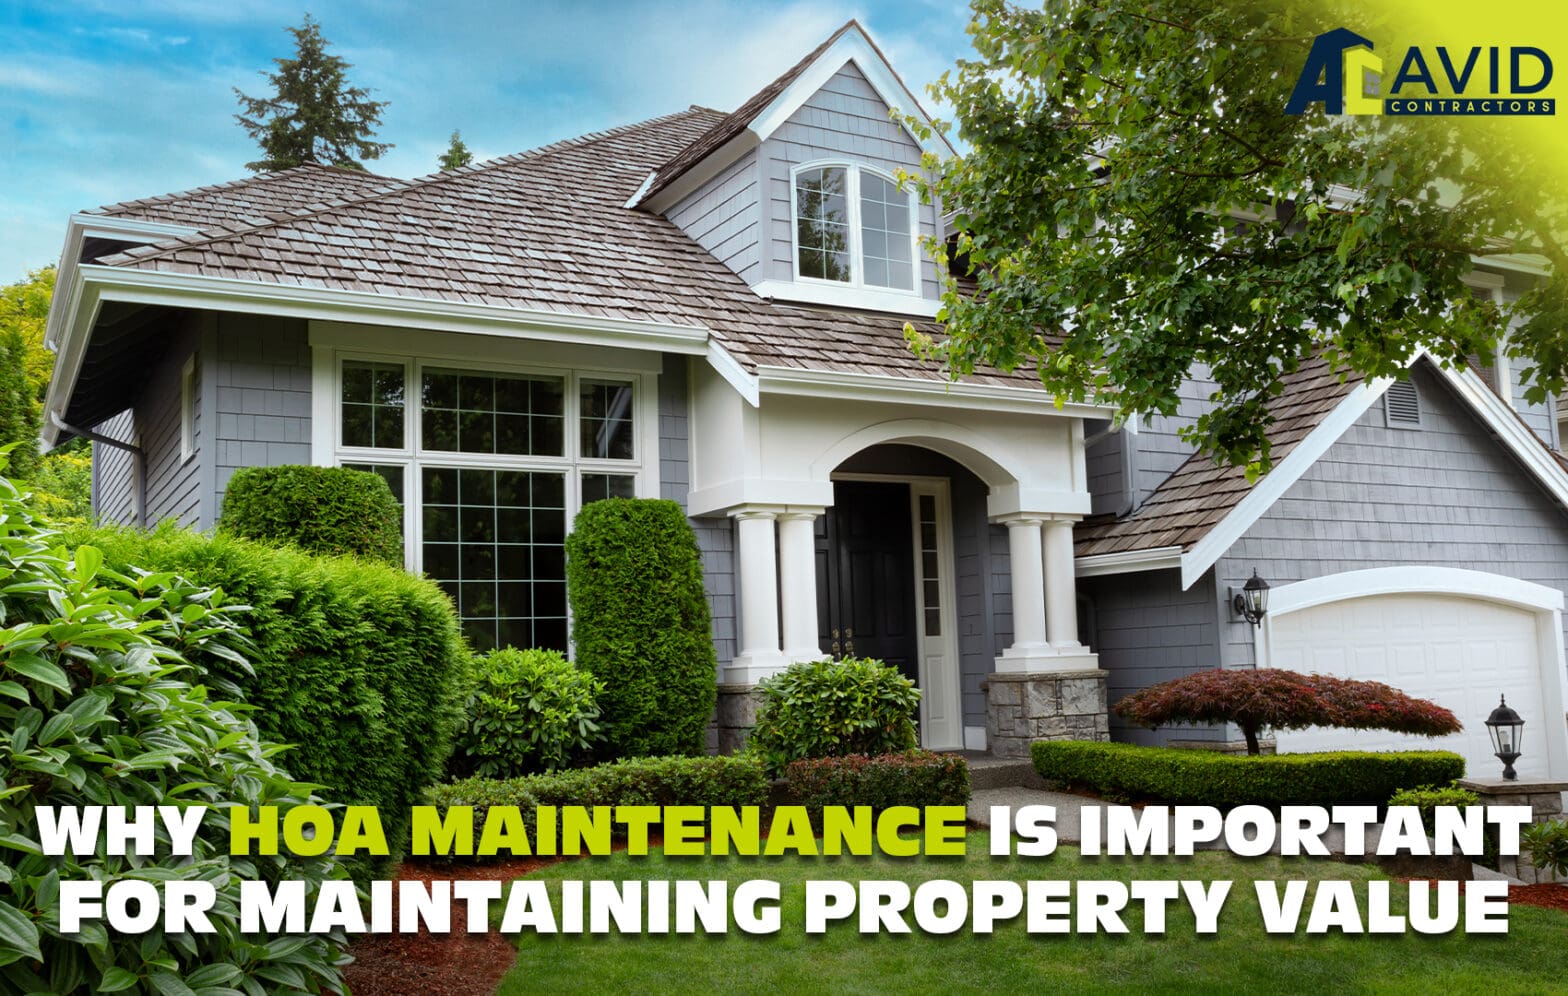 Why Maintenance is Important for Maintaining Property Value